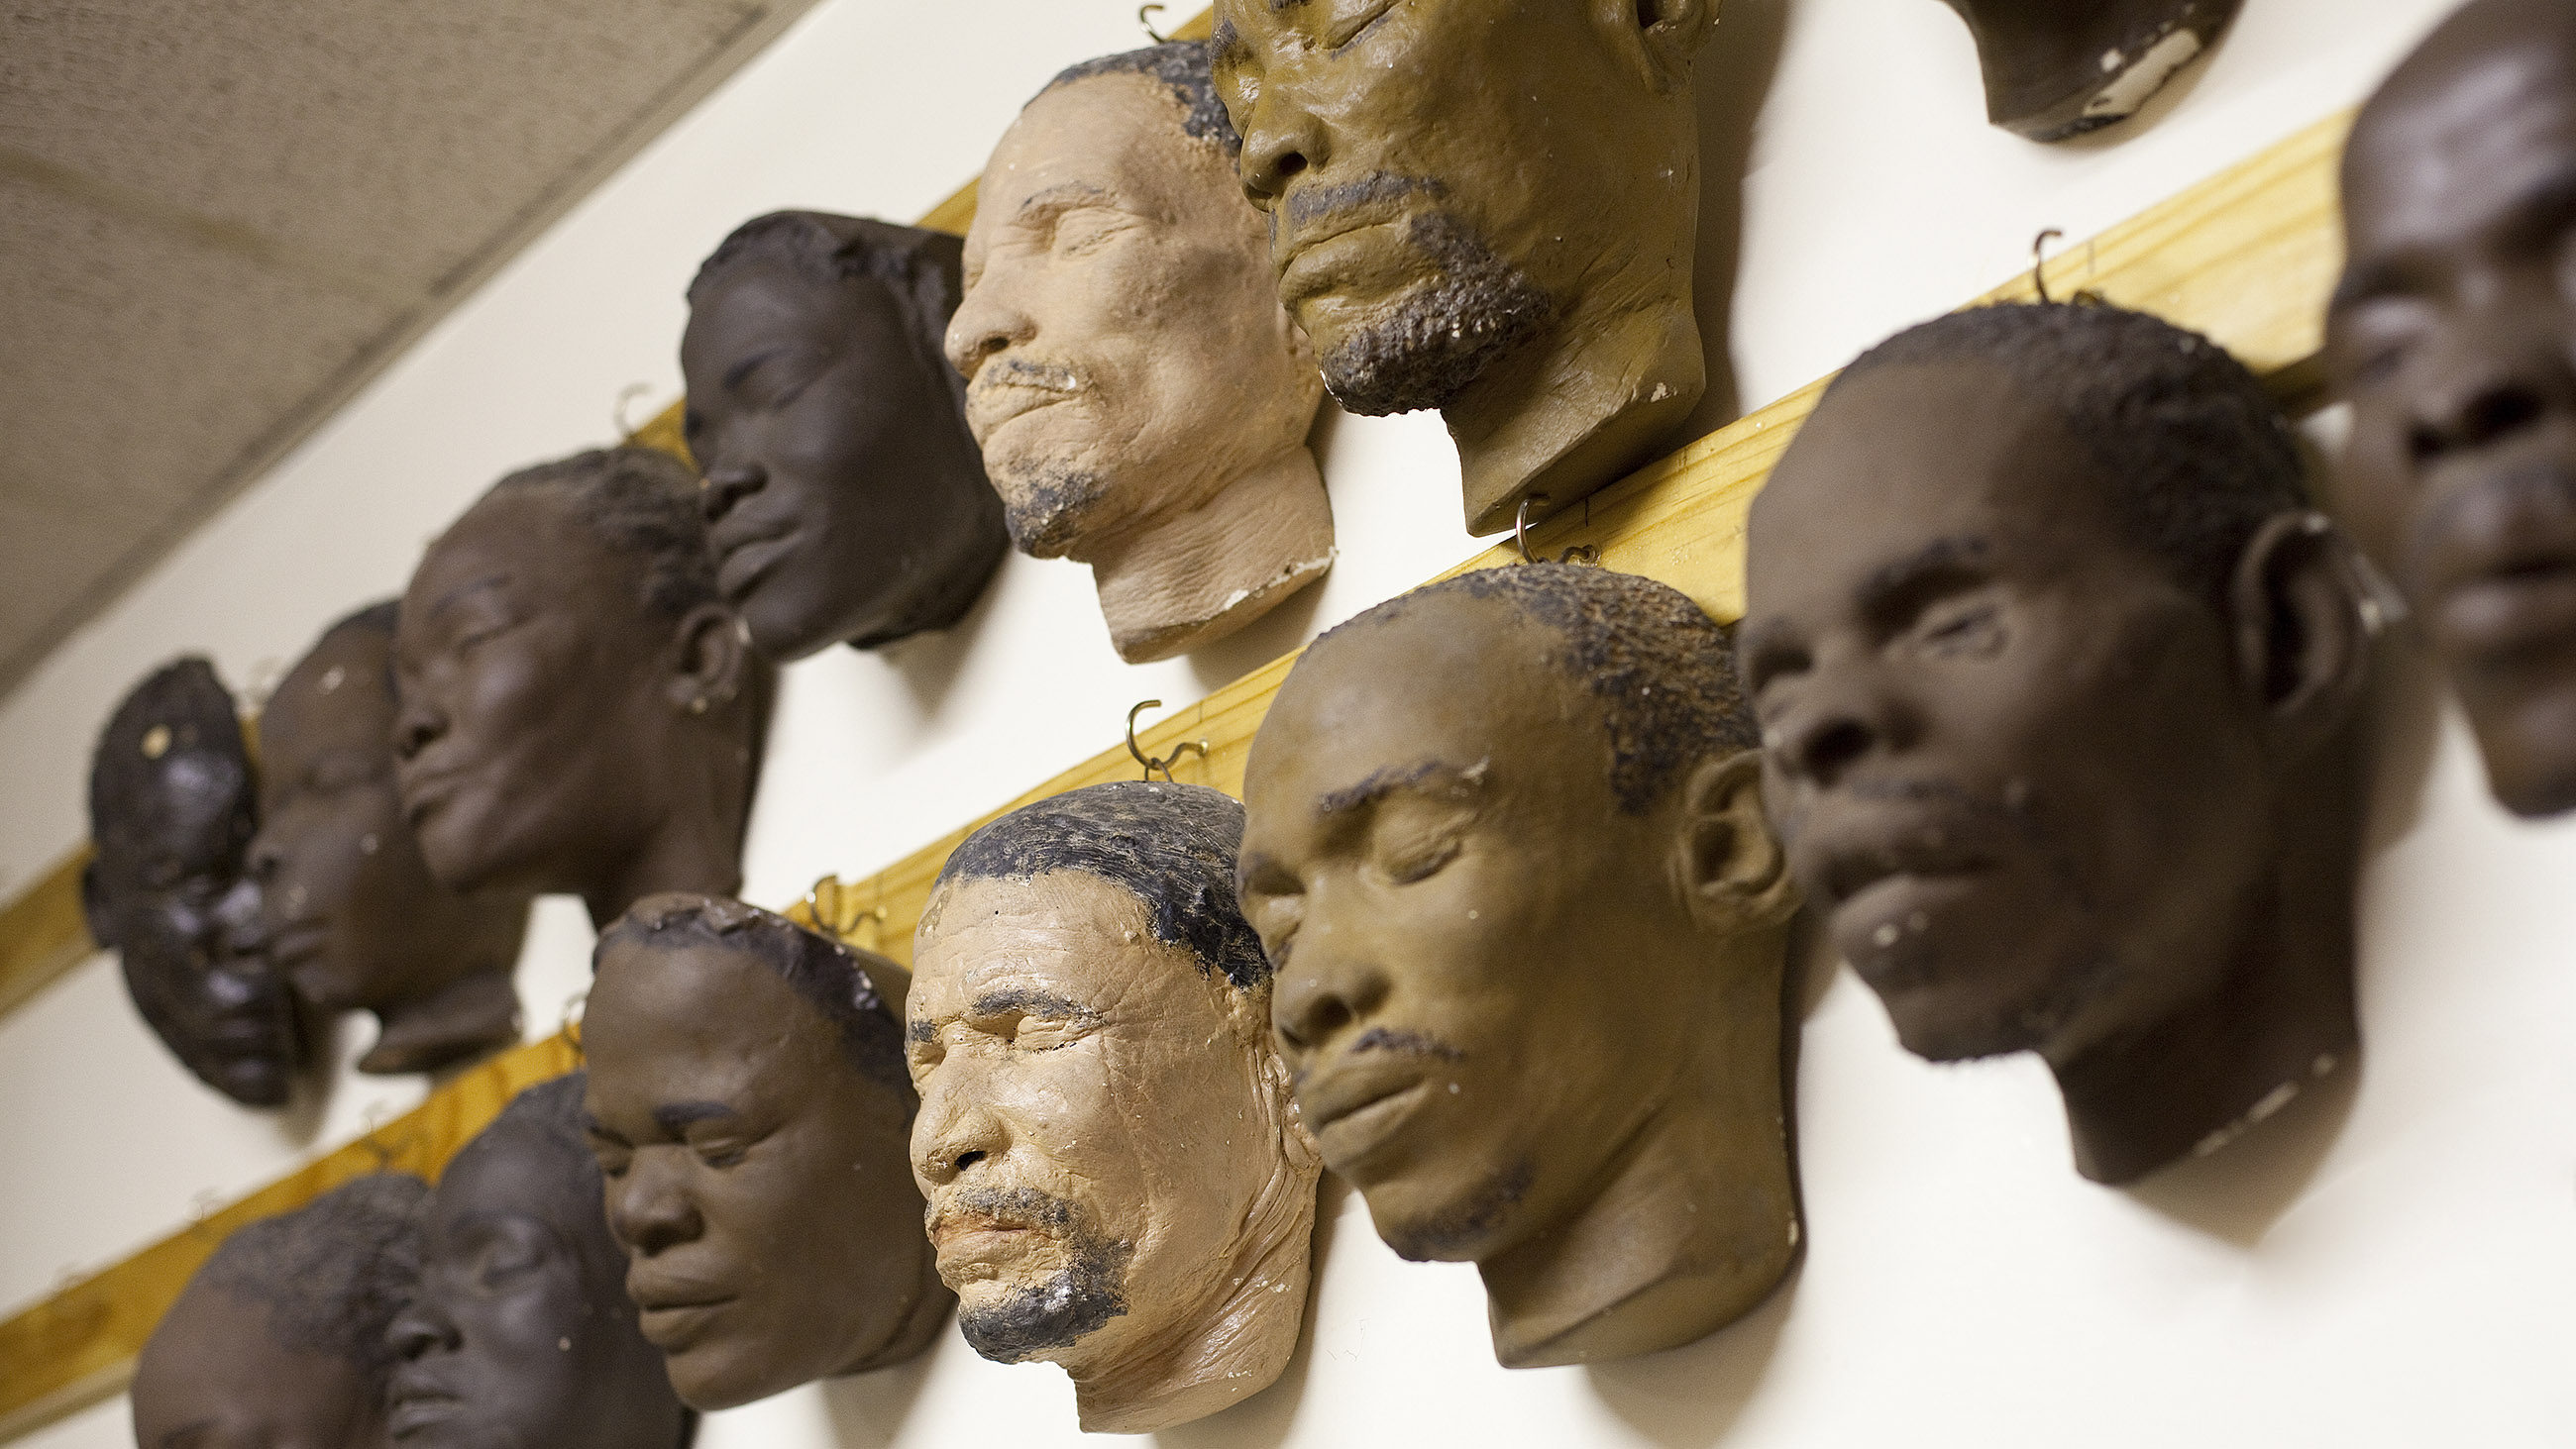 Life masks hang behind the mortuary in  the University of Witwatersrand's health sciences building. Collected to show the differences between tribes and races, researchers now want to use them to help identify bodies.